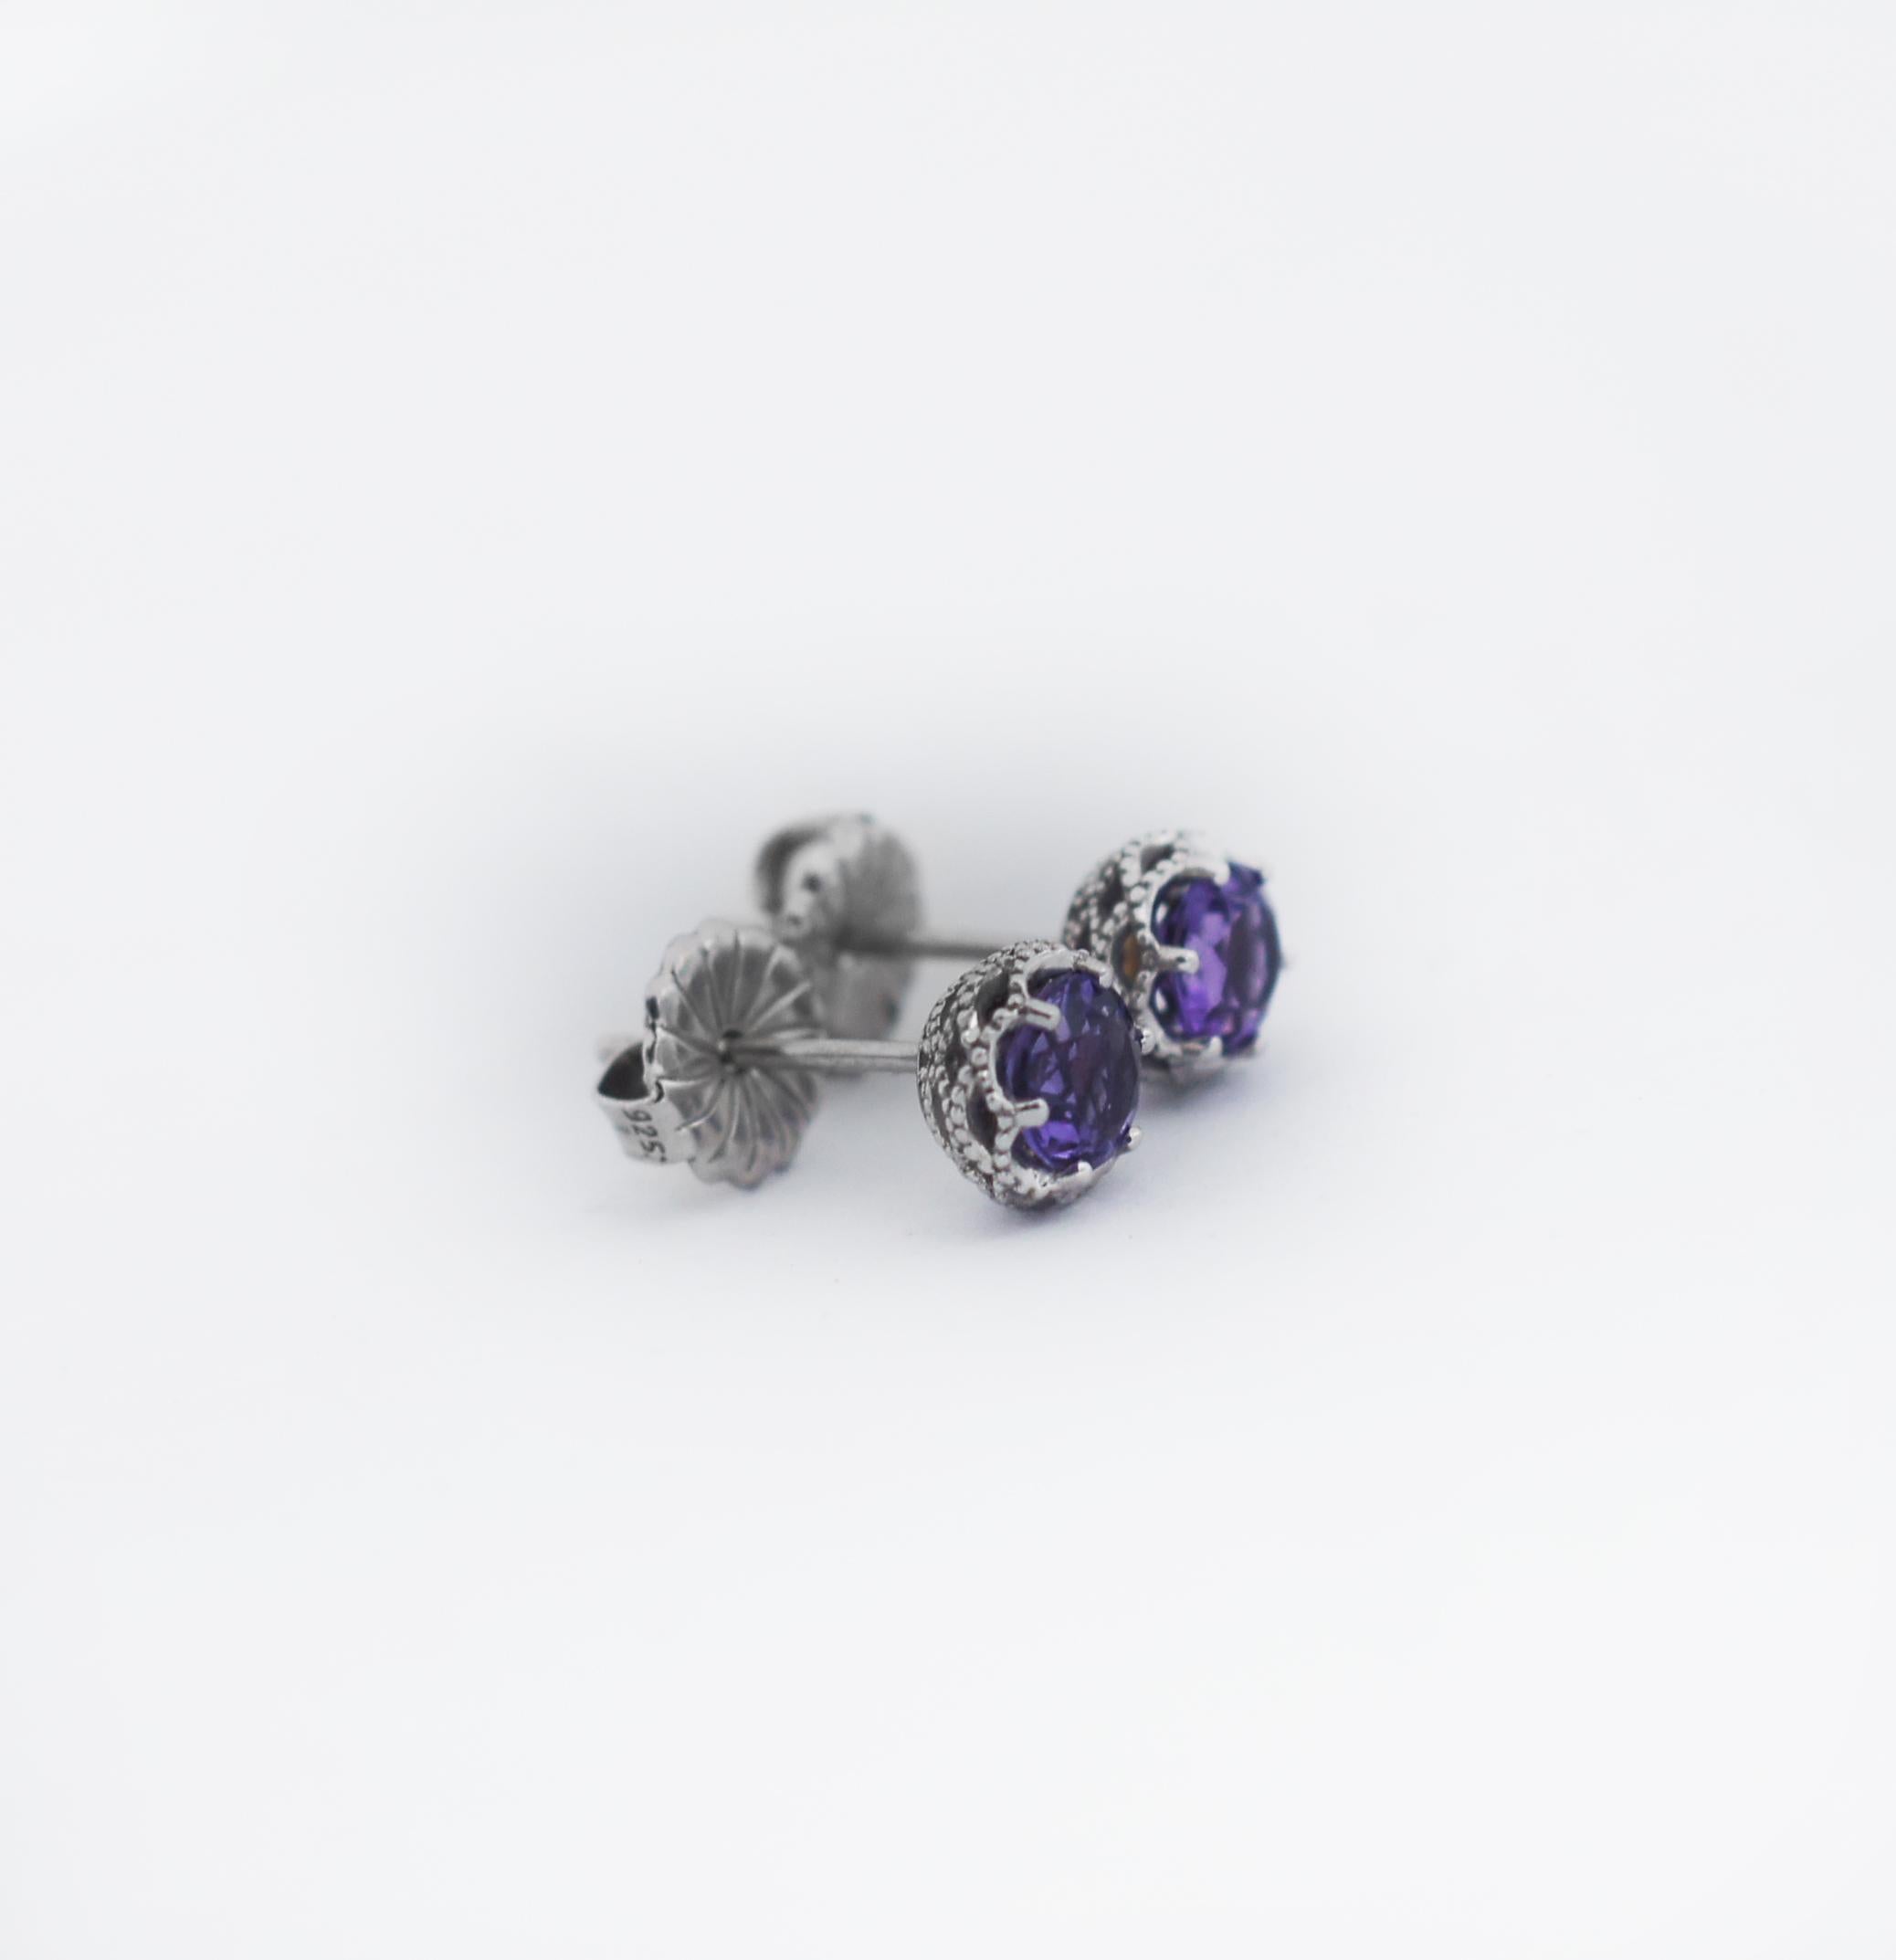 TACORI 925 Silver Amethyst Crescent Crown Petite Stud Earrings In Excellent Condition For Sale In San Fernando, CA